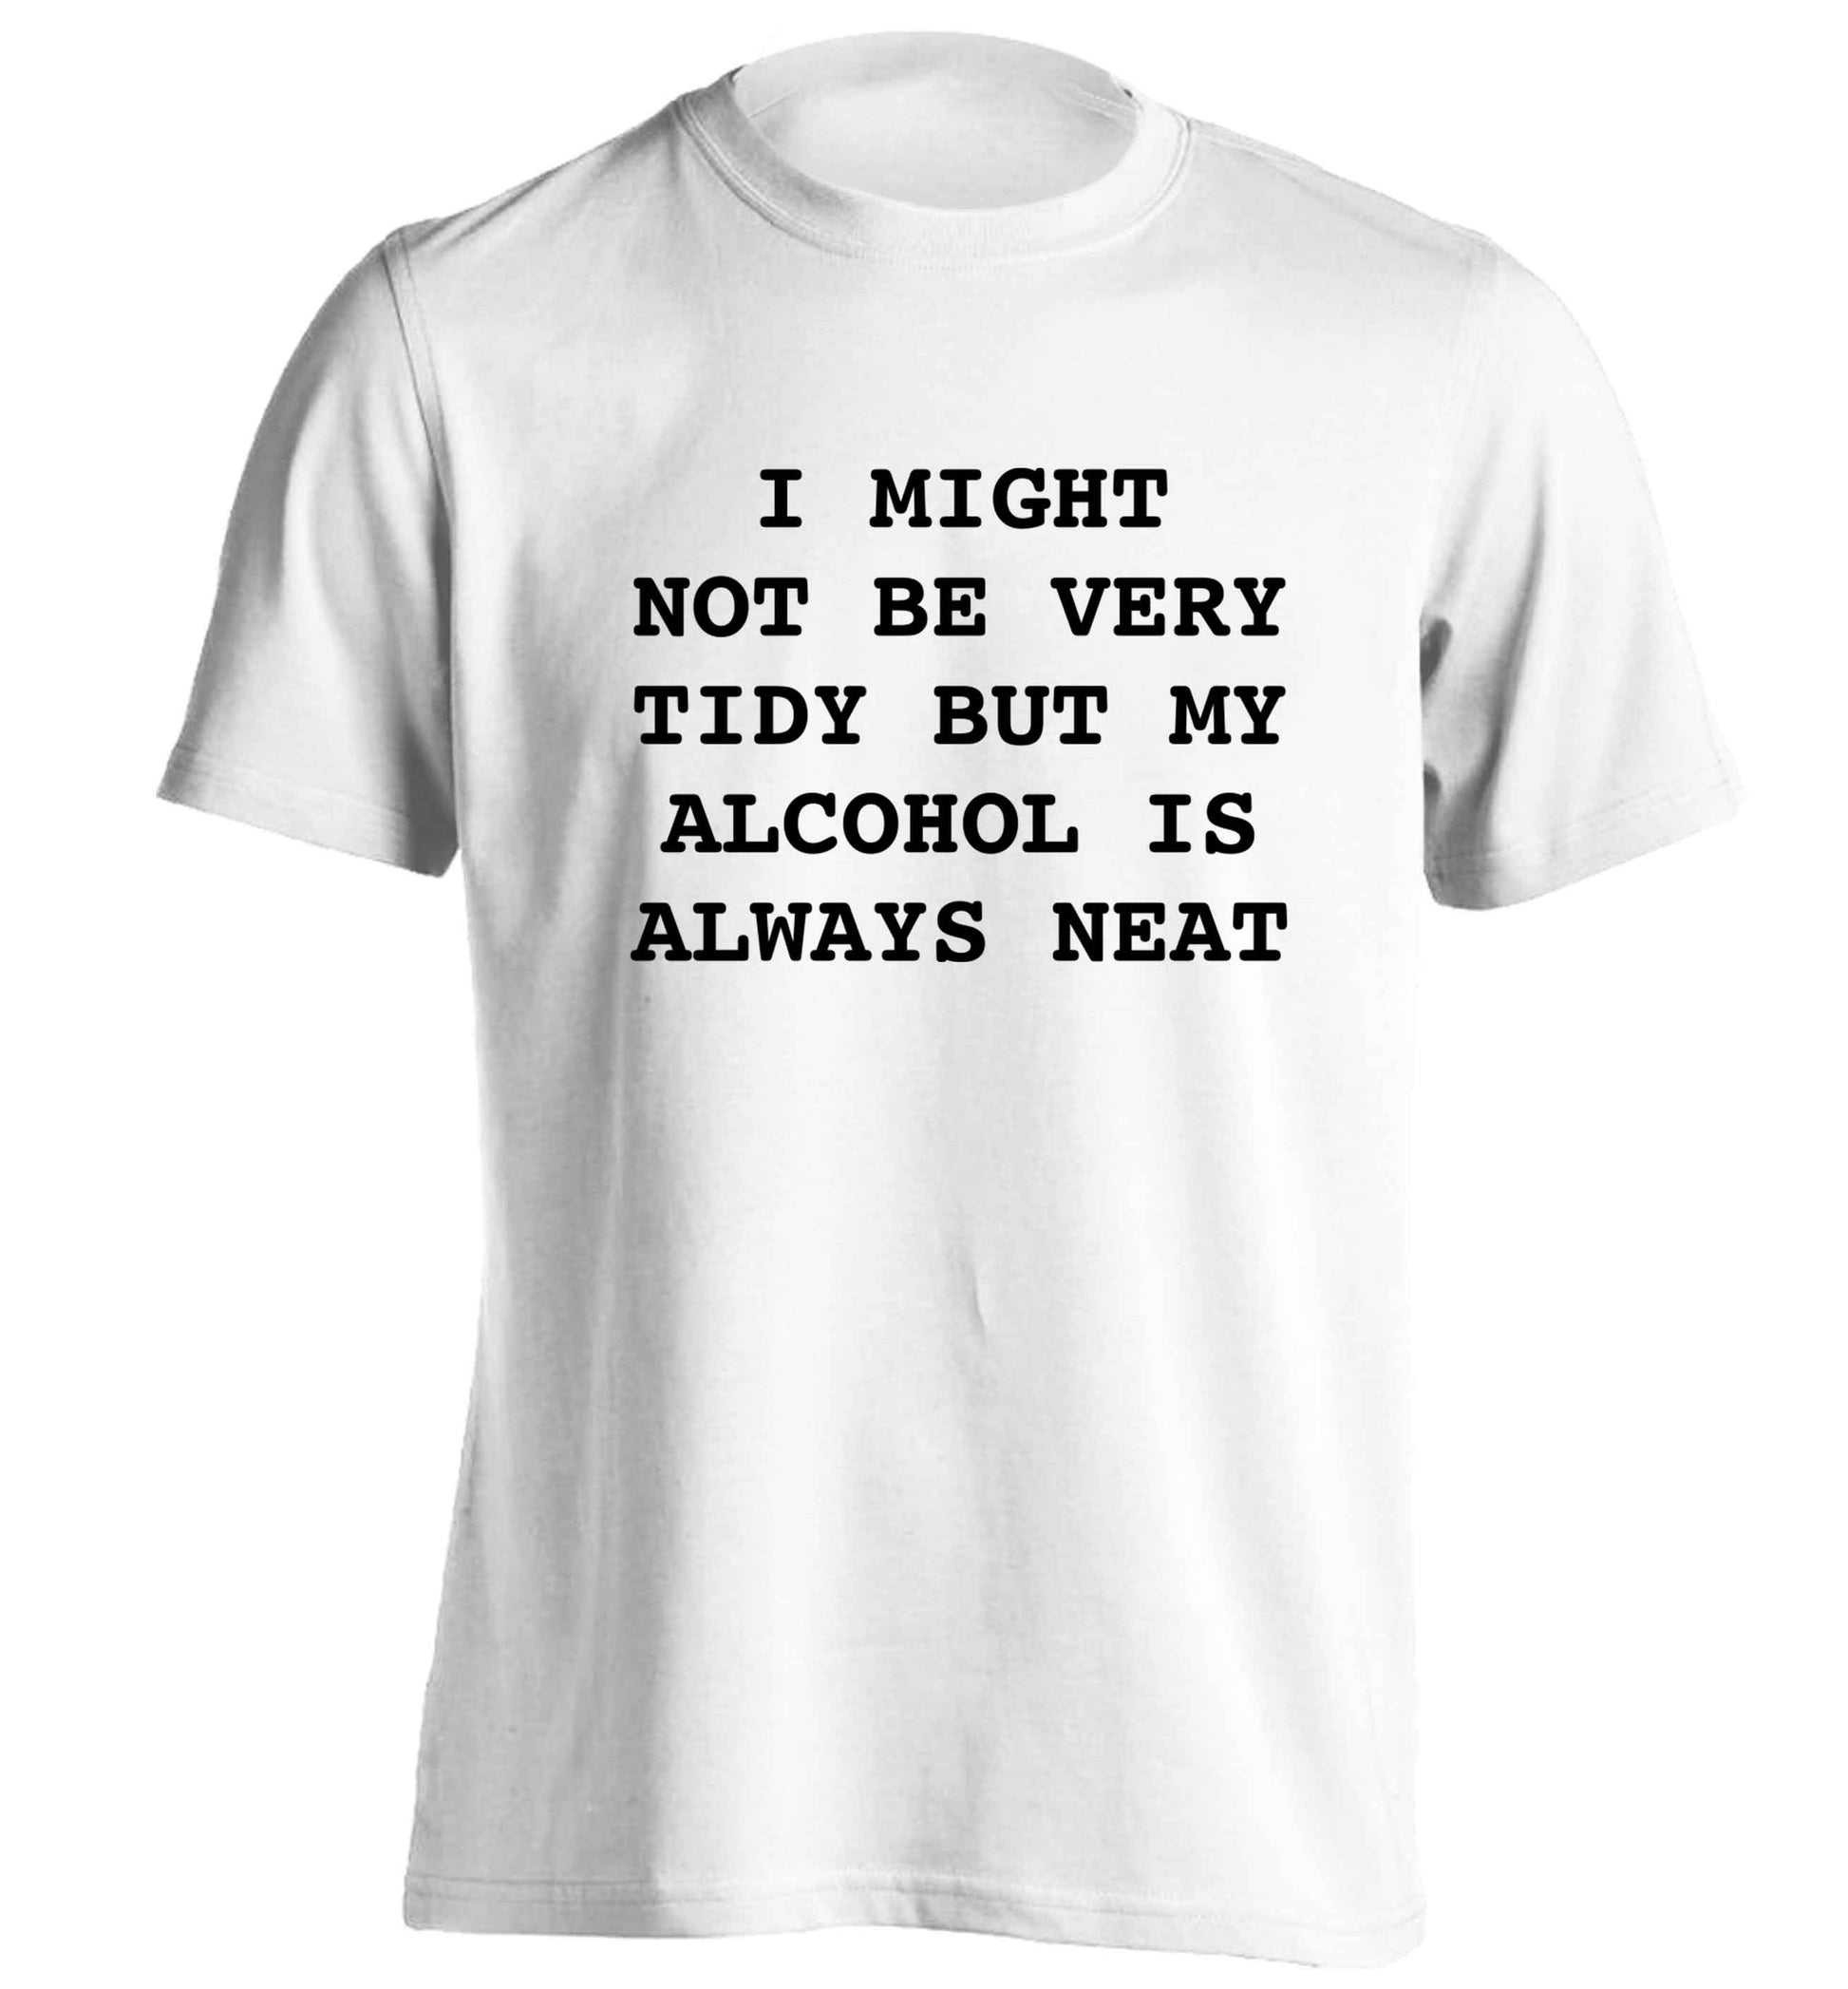 I might not be tidy but my alcohol is always neat adults unisex white Tshirt 2XL